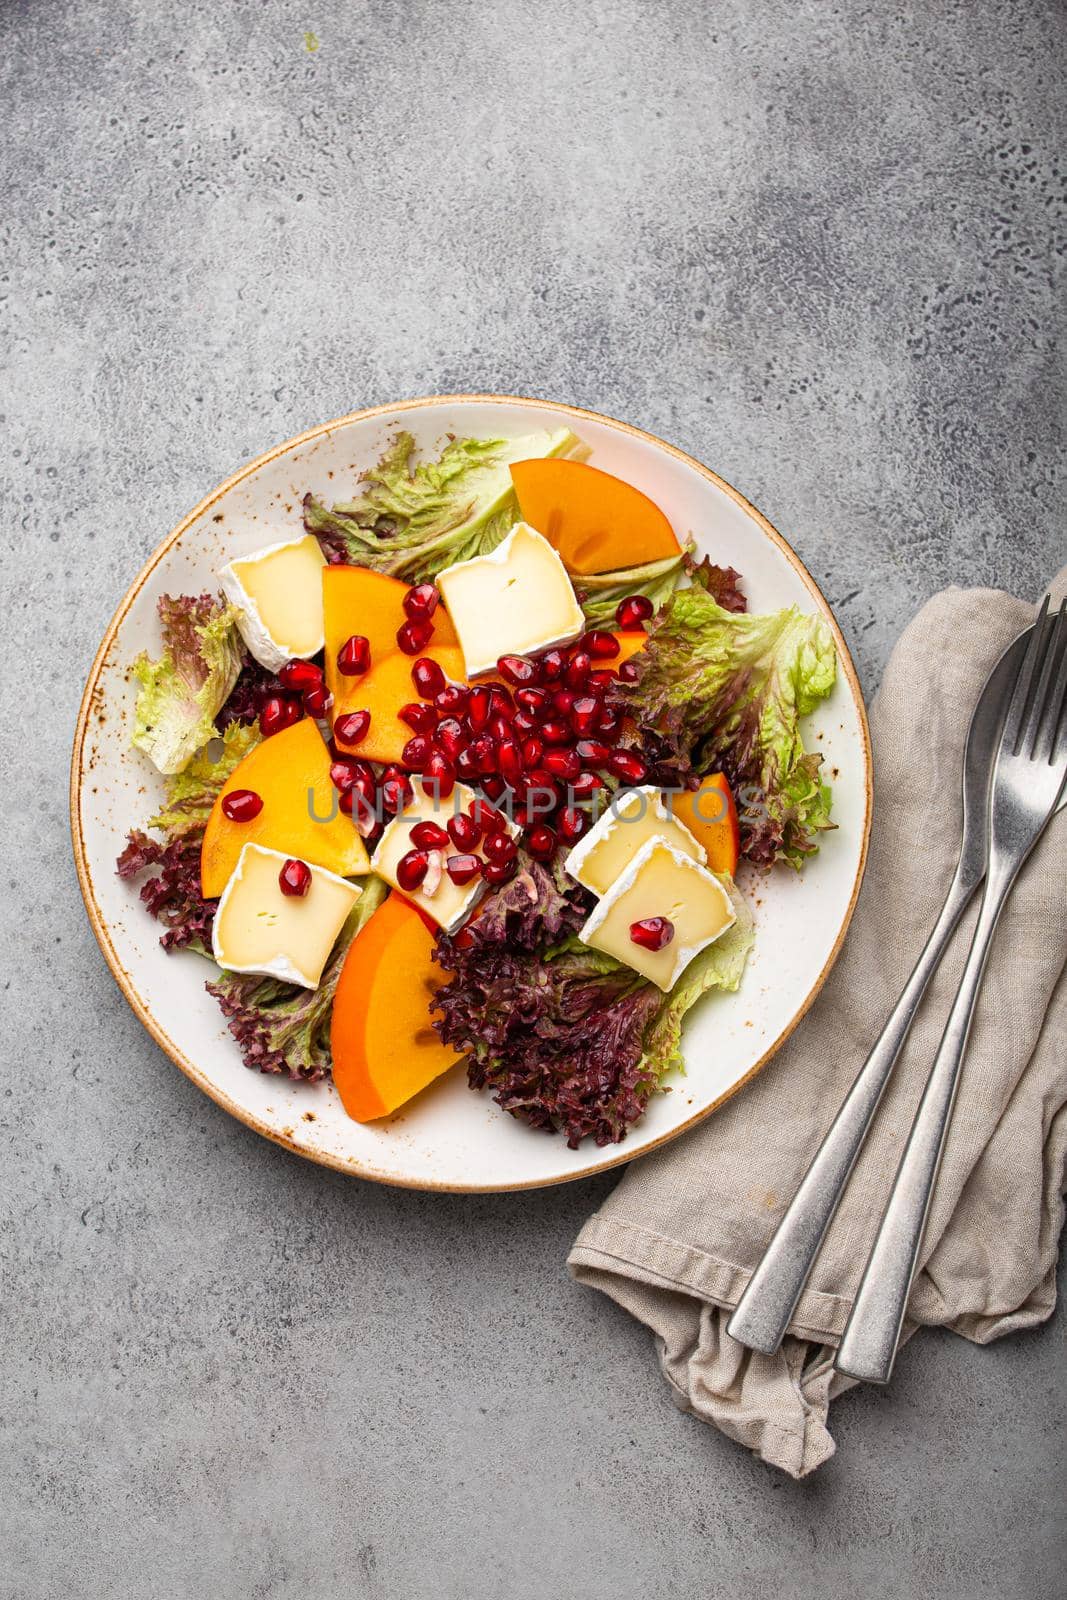 Top view flat lay persimmon salad with brie cheese, fresh salad leaves, pomegranate seeds on white plate and stone gray background, seasonal fruit salad as appetizer, vegetarian healthy food